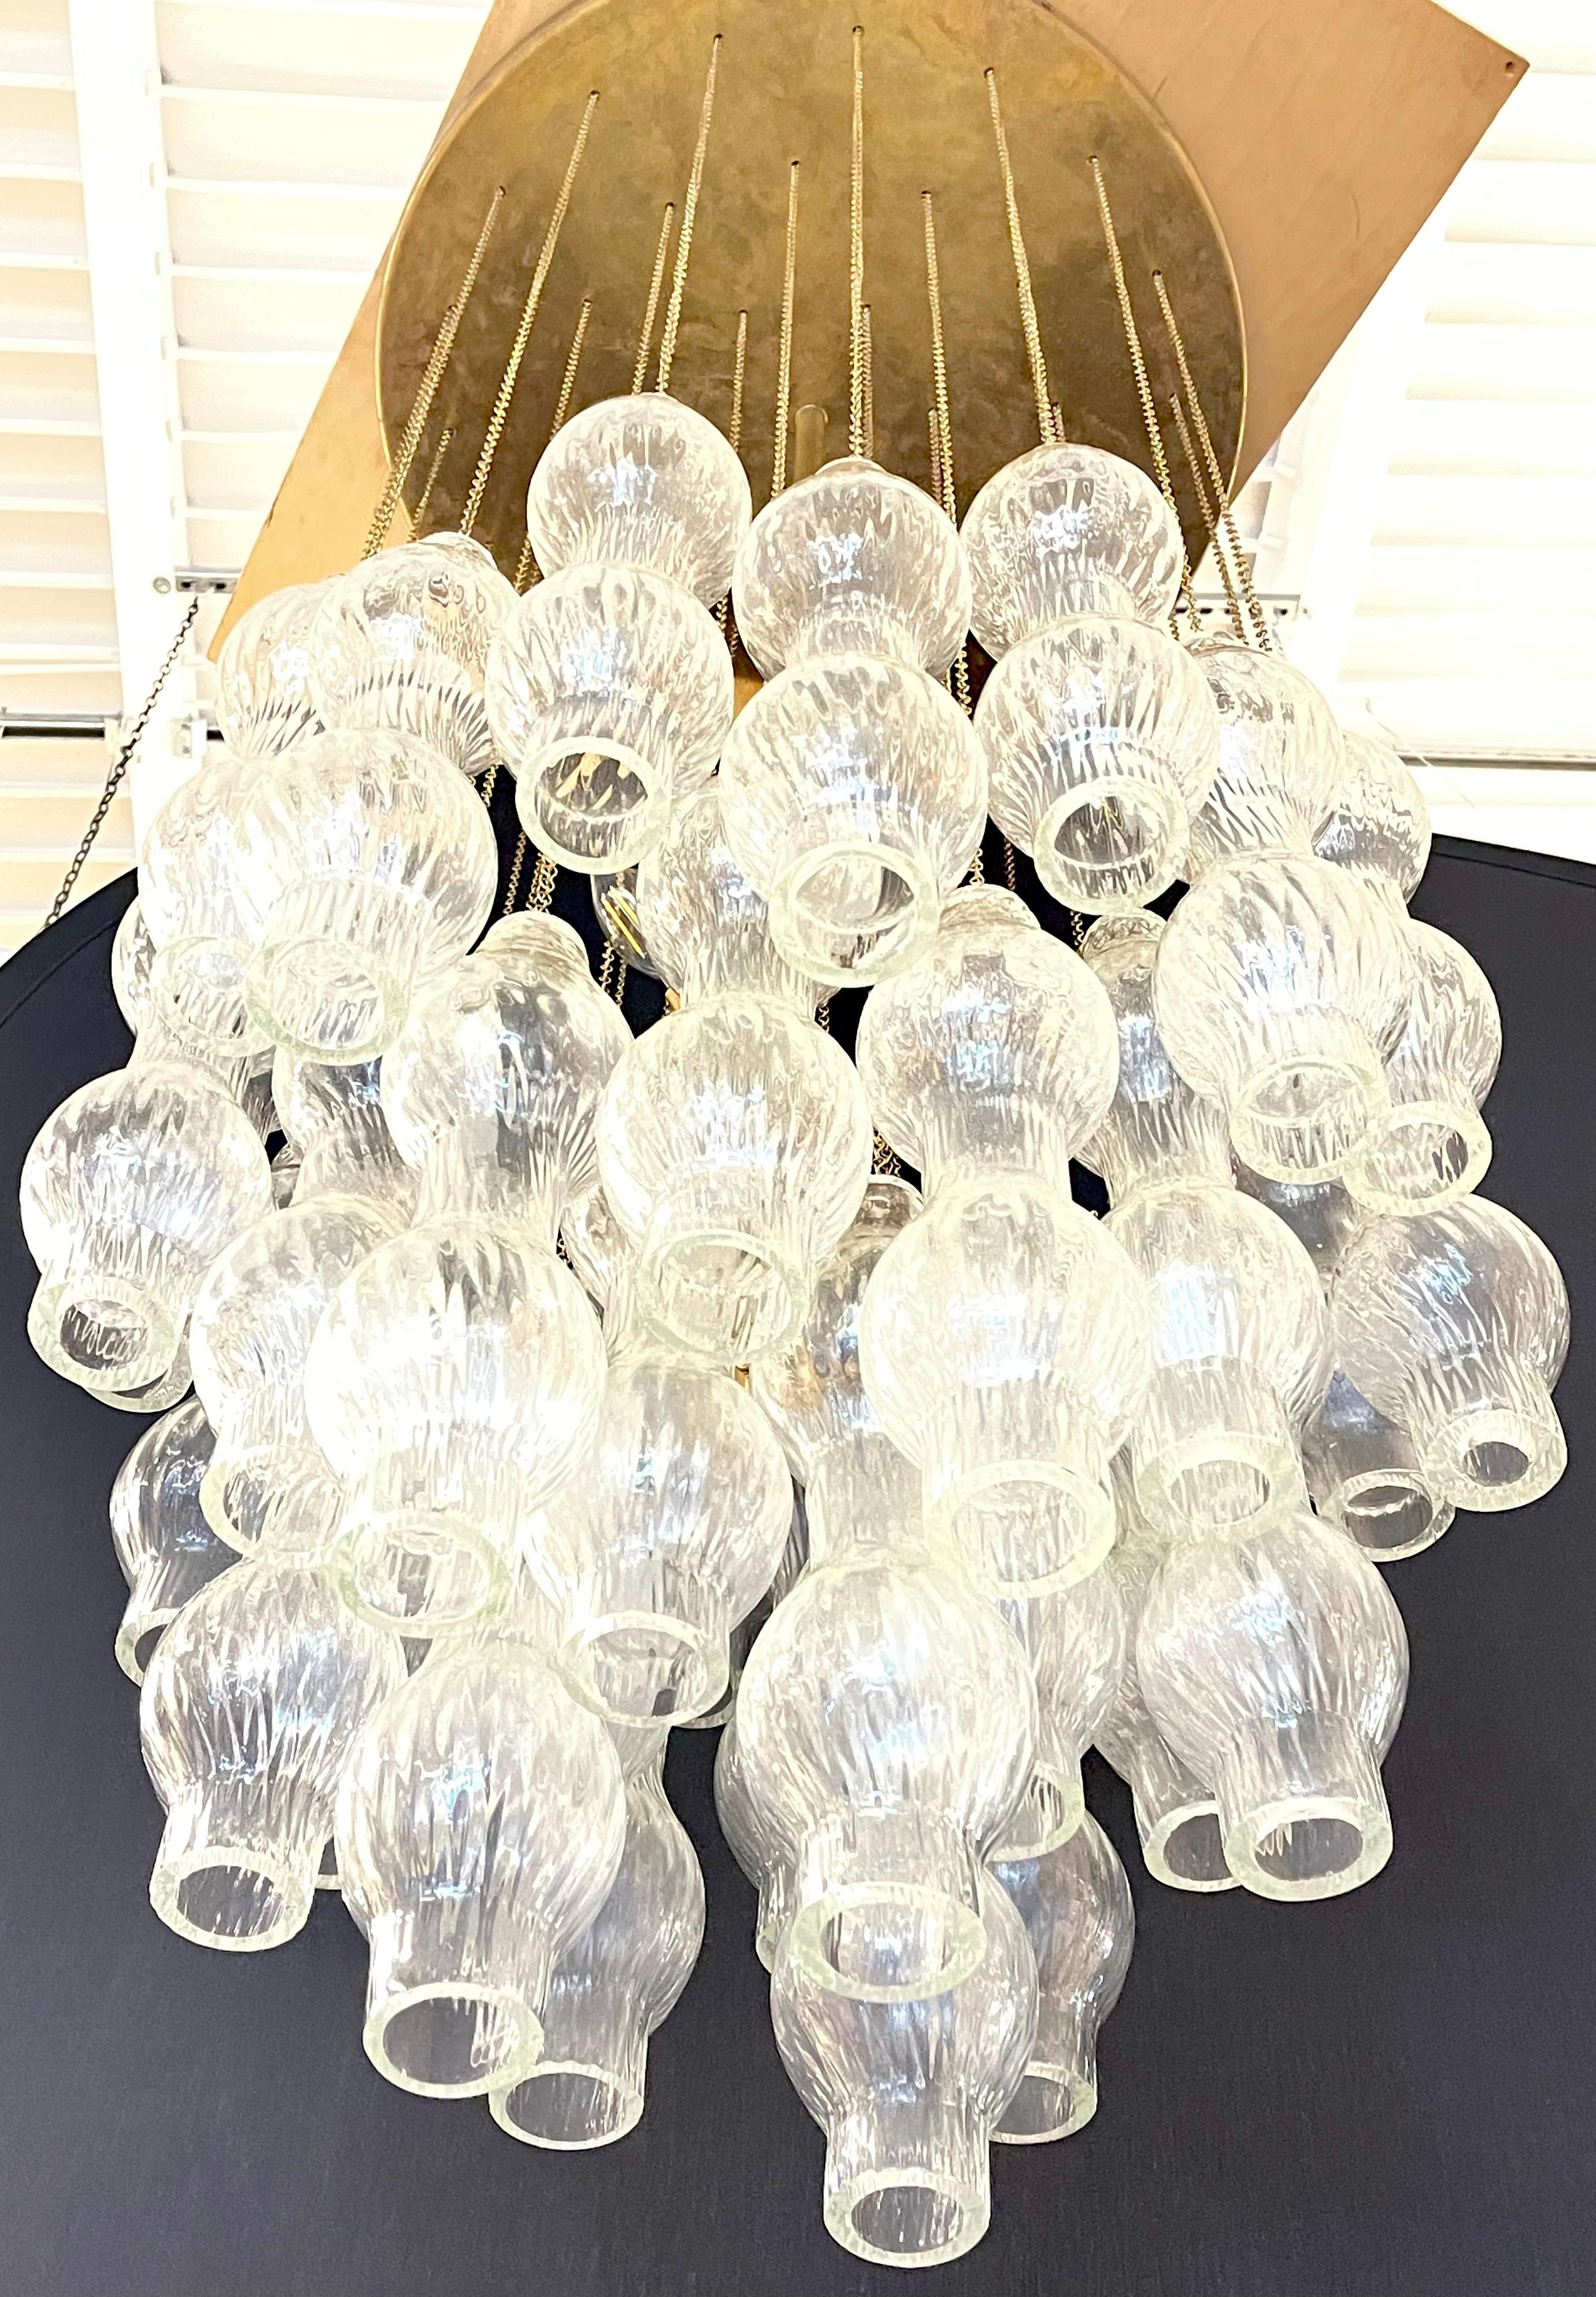 Mid-Century Modern glass chandelier having a myraid of bolbous form hanging flutes. Made in Italy circa 1950s. 

This is part of our extensive collection which just arrived from Chicago's renowned interior designer Megan Winters. Megan and her